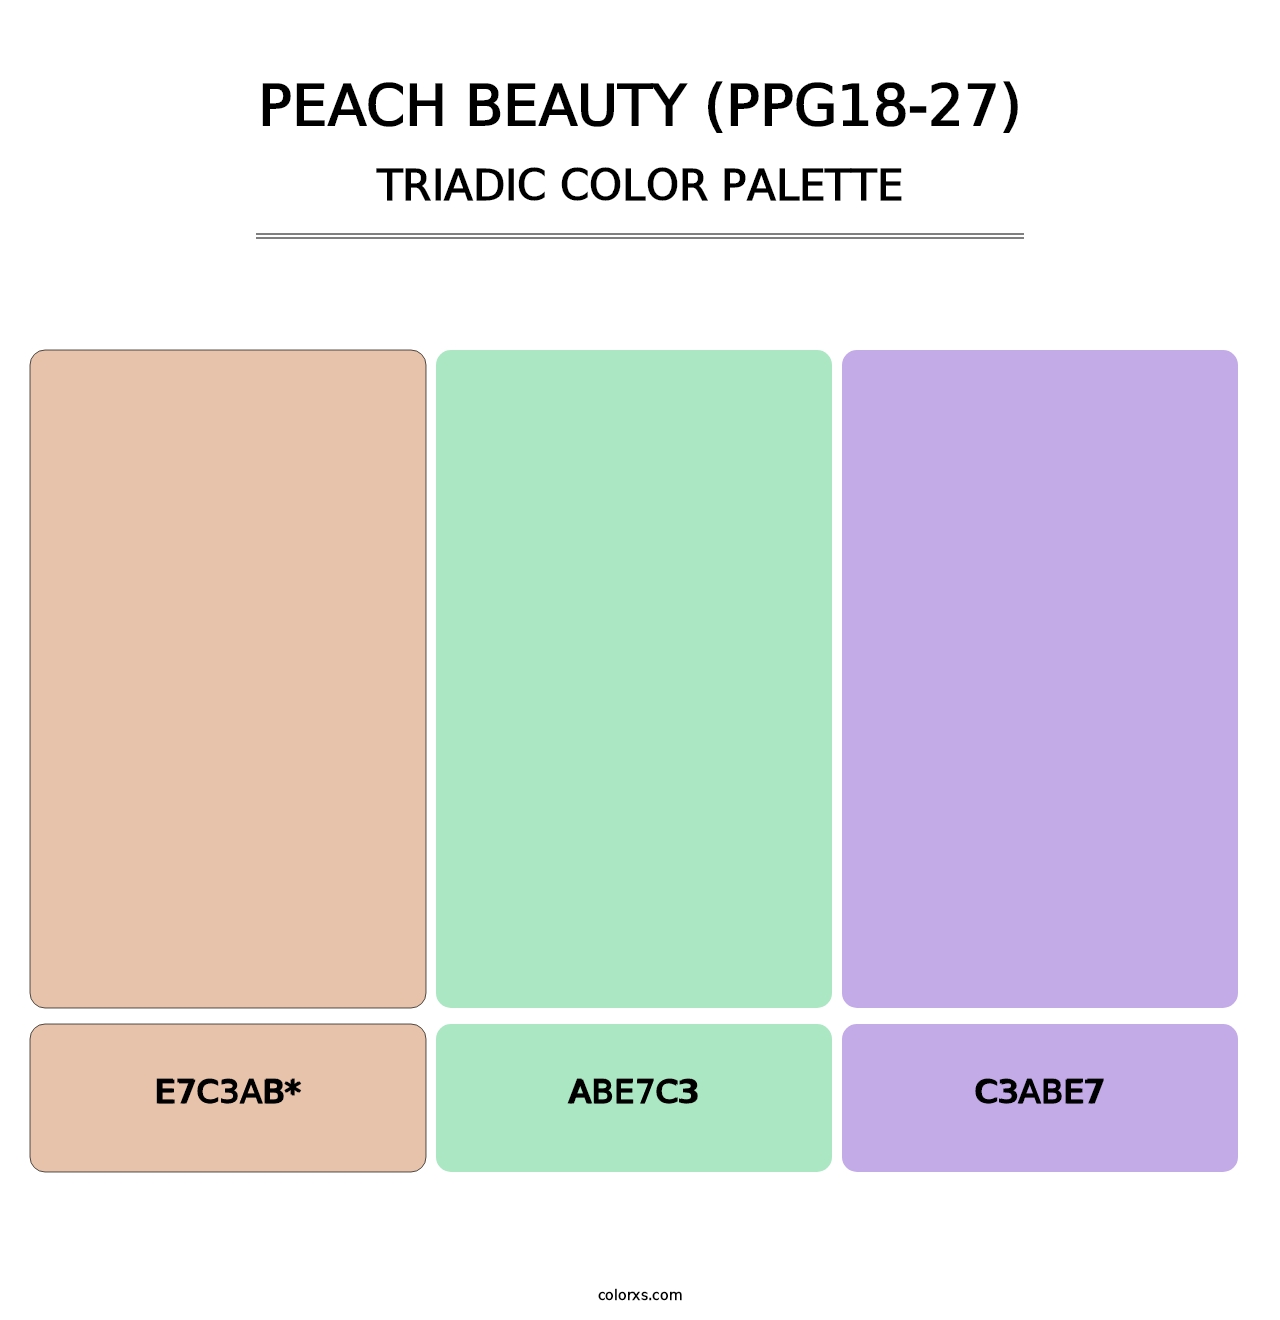 Peach Beauty (PPG18-27) - Triadic Color Palette